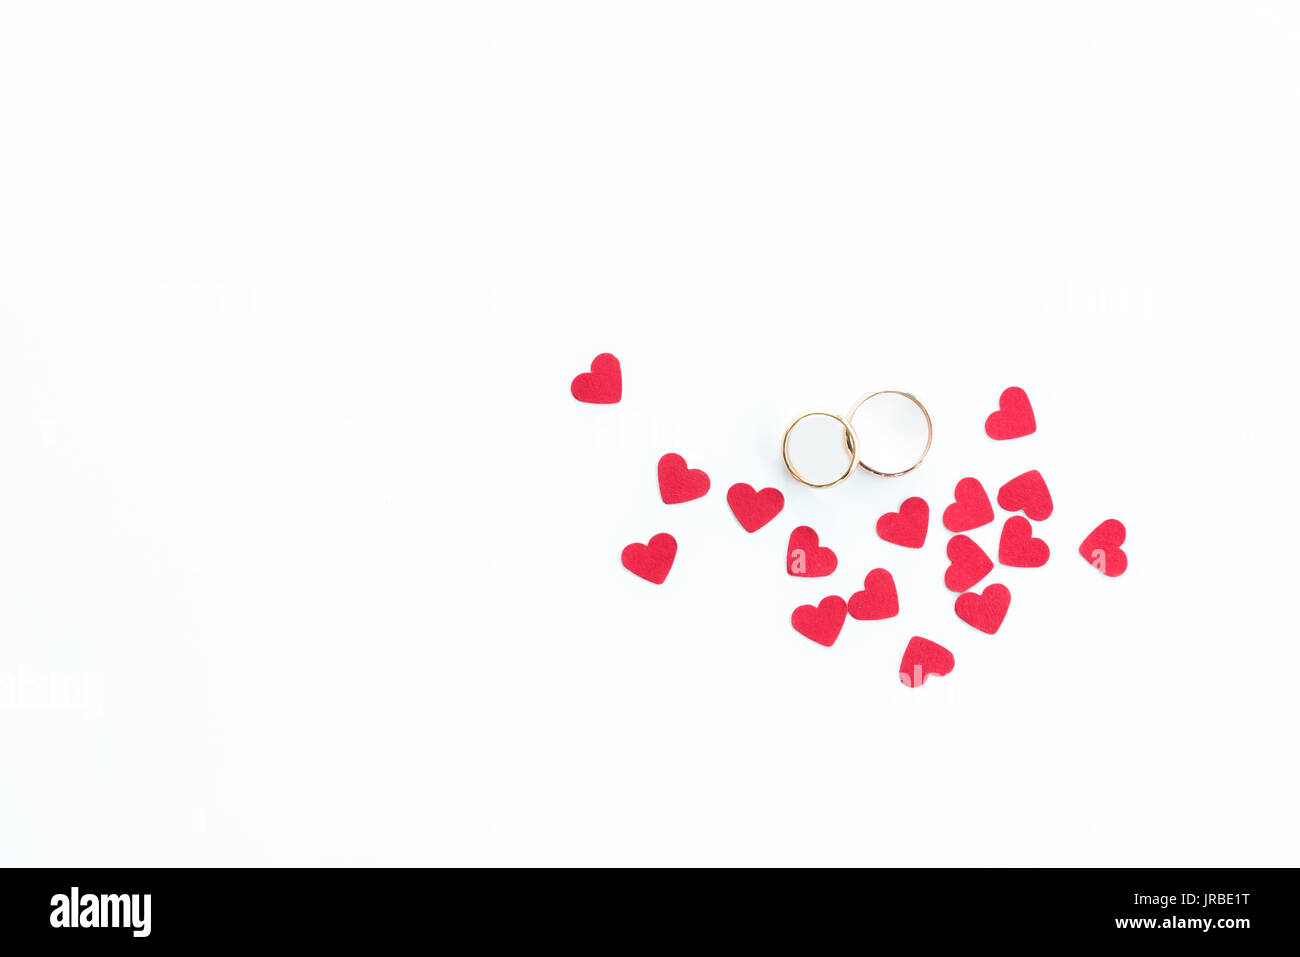 Top view of golden wedding rings and pink hearts symbols isolated on white, wedding rings background Stock Photo